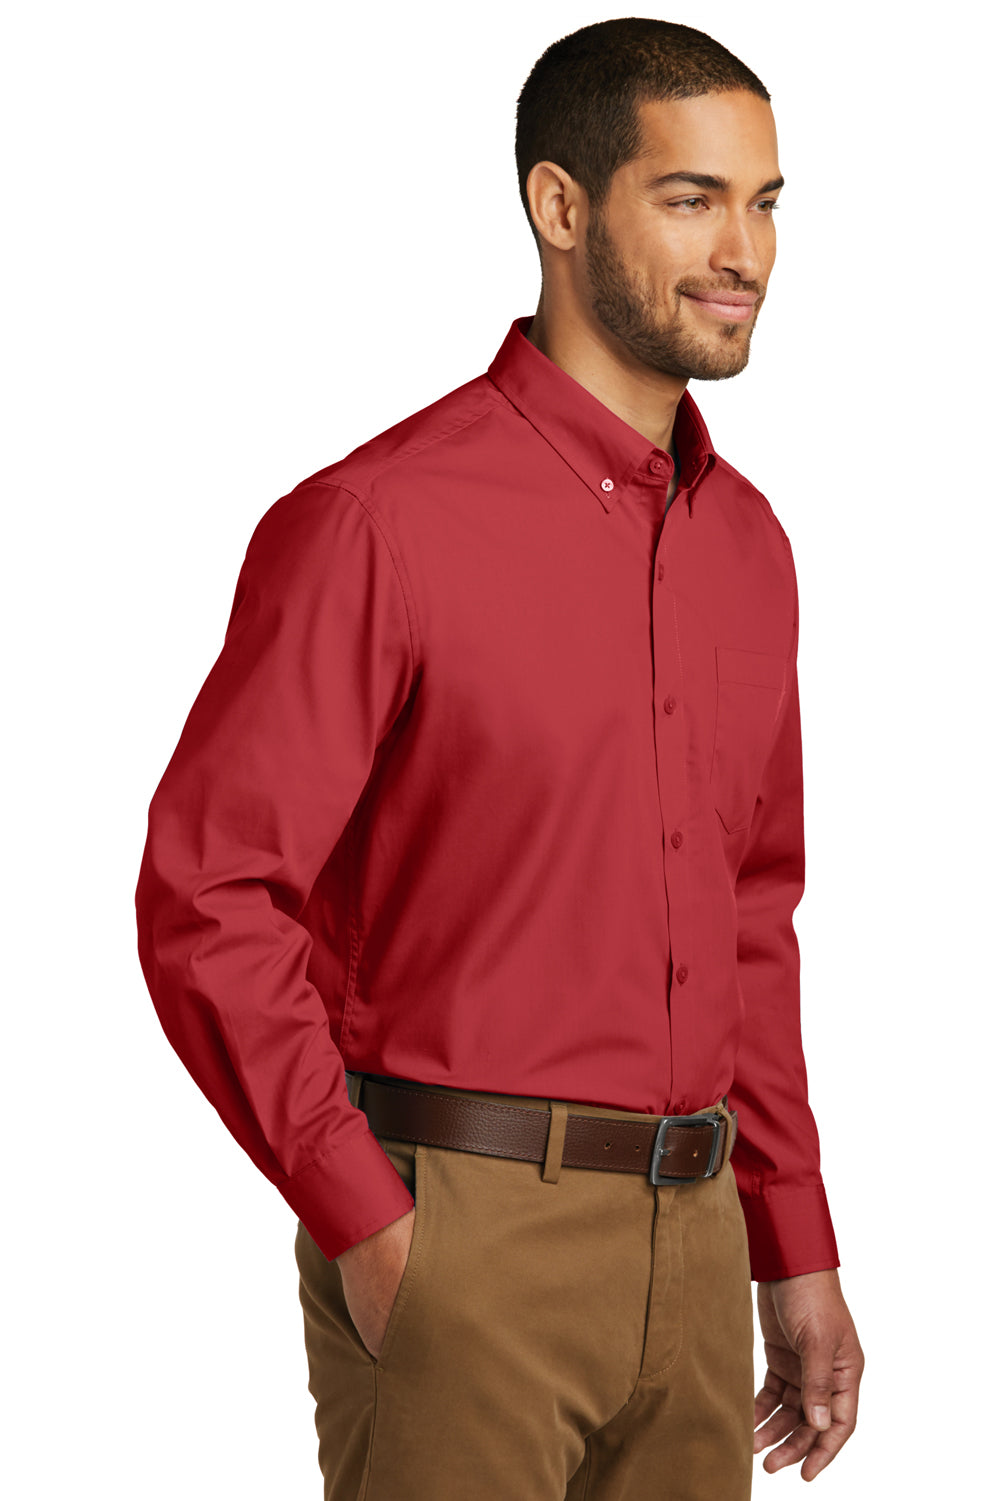 Port Authority W100/TW100 Carefree Stain Resistant Long Sleeve Button Down Shirt w/ Pocket Rich Red 3Q